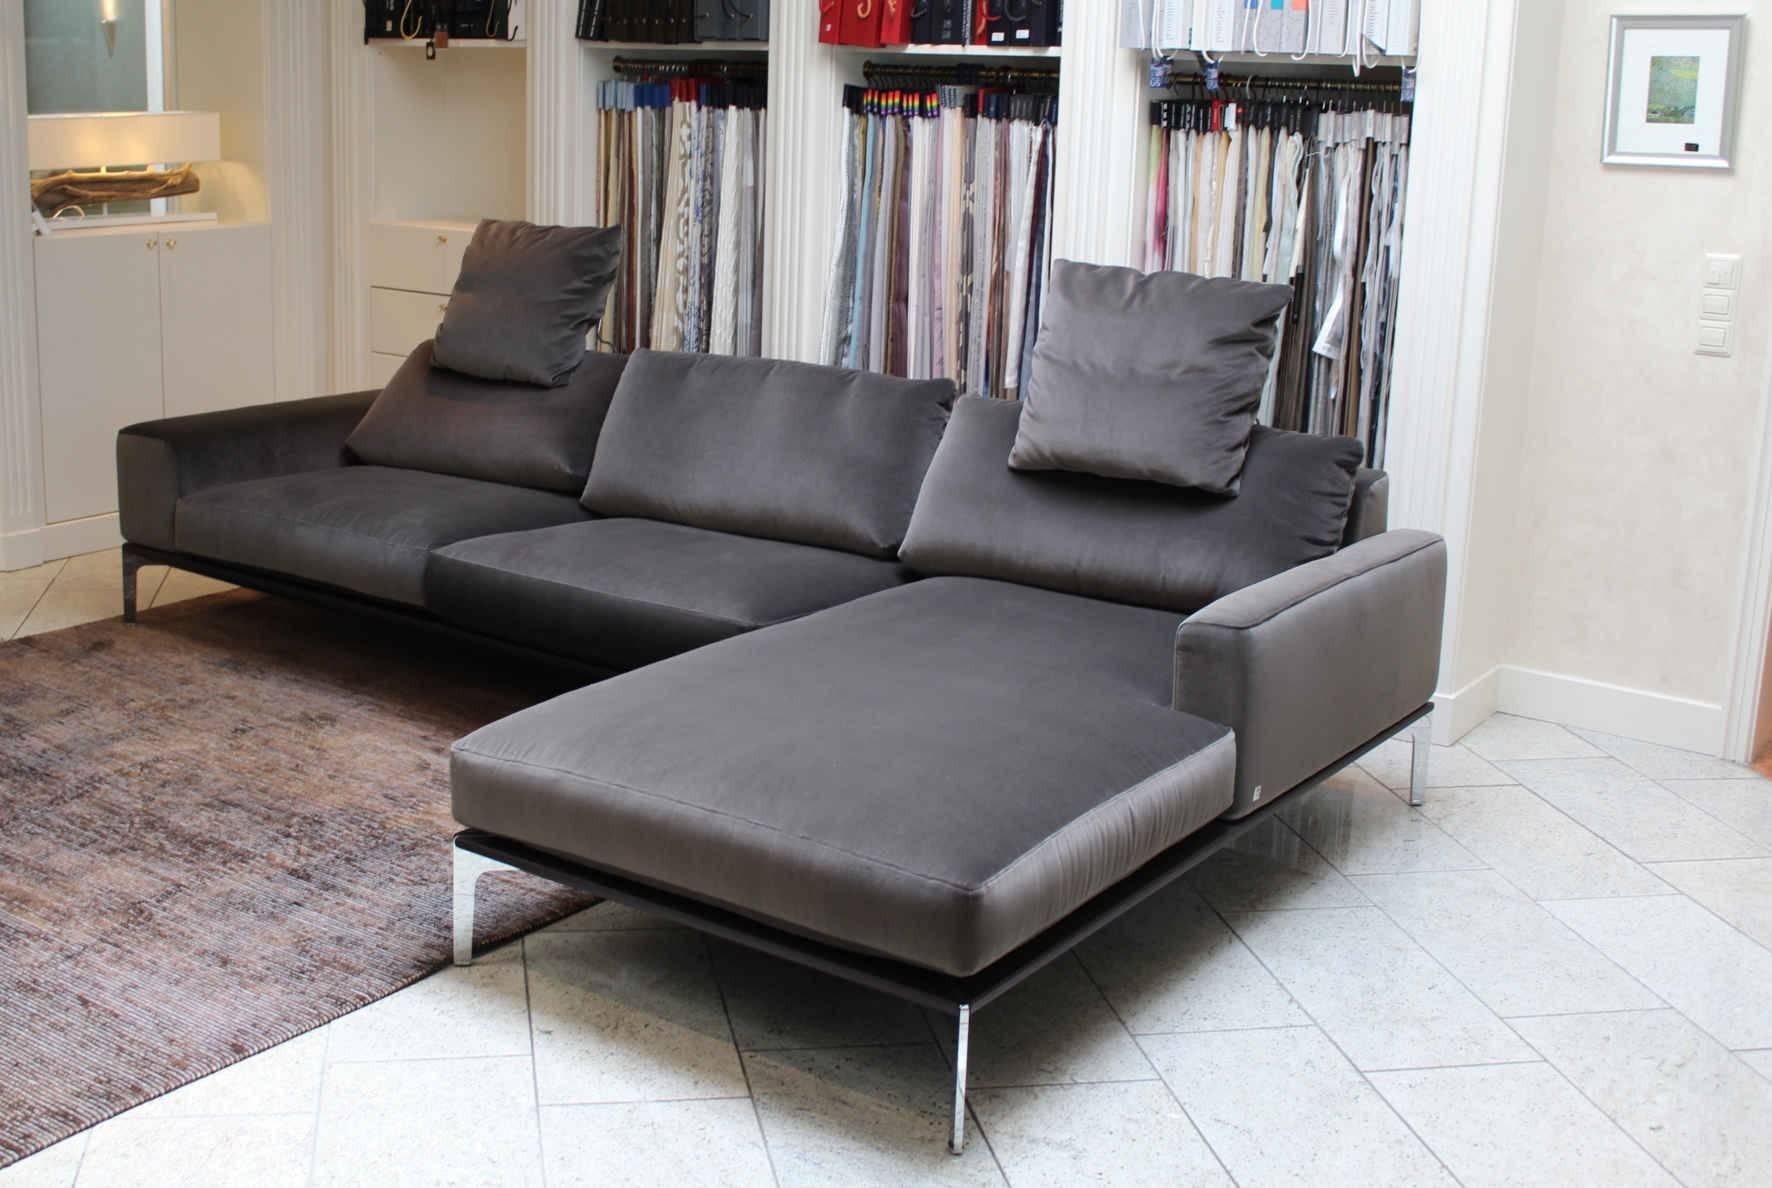 This corner sofa has a fabric covering and has a wooden base with a leather covering. Its covering is shimmers brown-grey and is in excellent condition. It comes from one of our well curated showrooms in Germany.